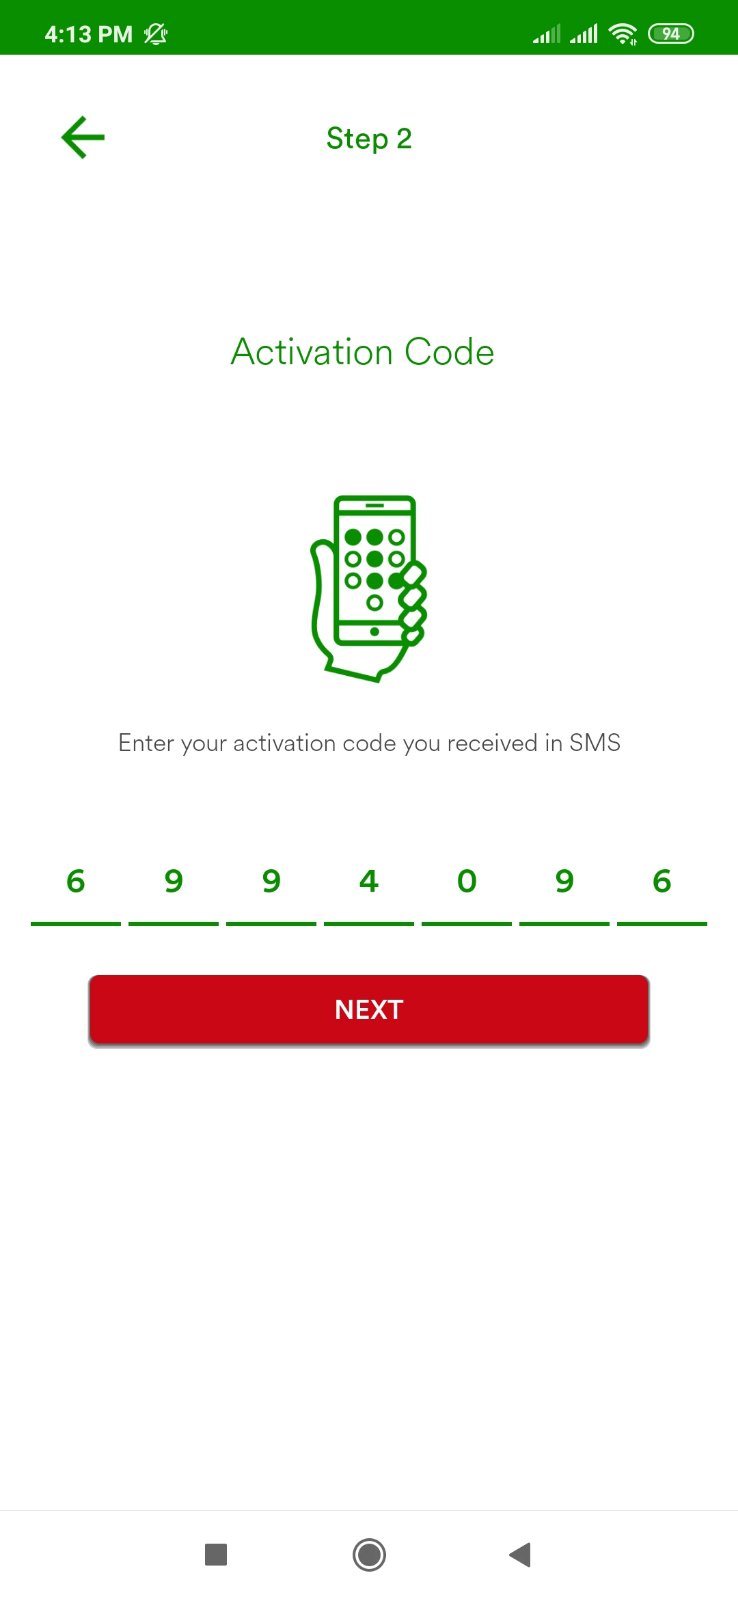 Activation Code - Image